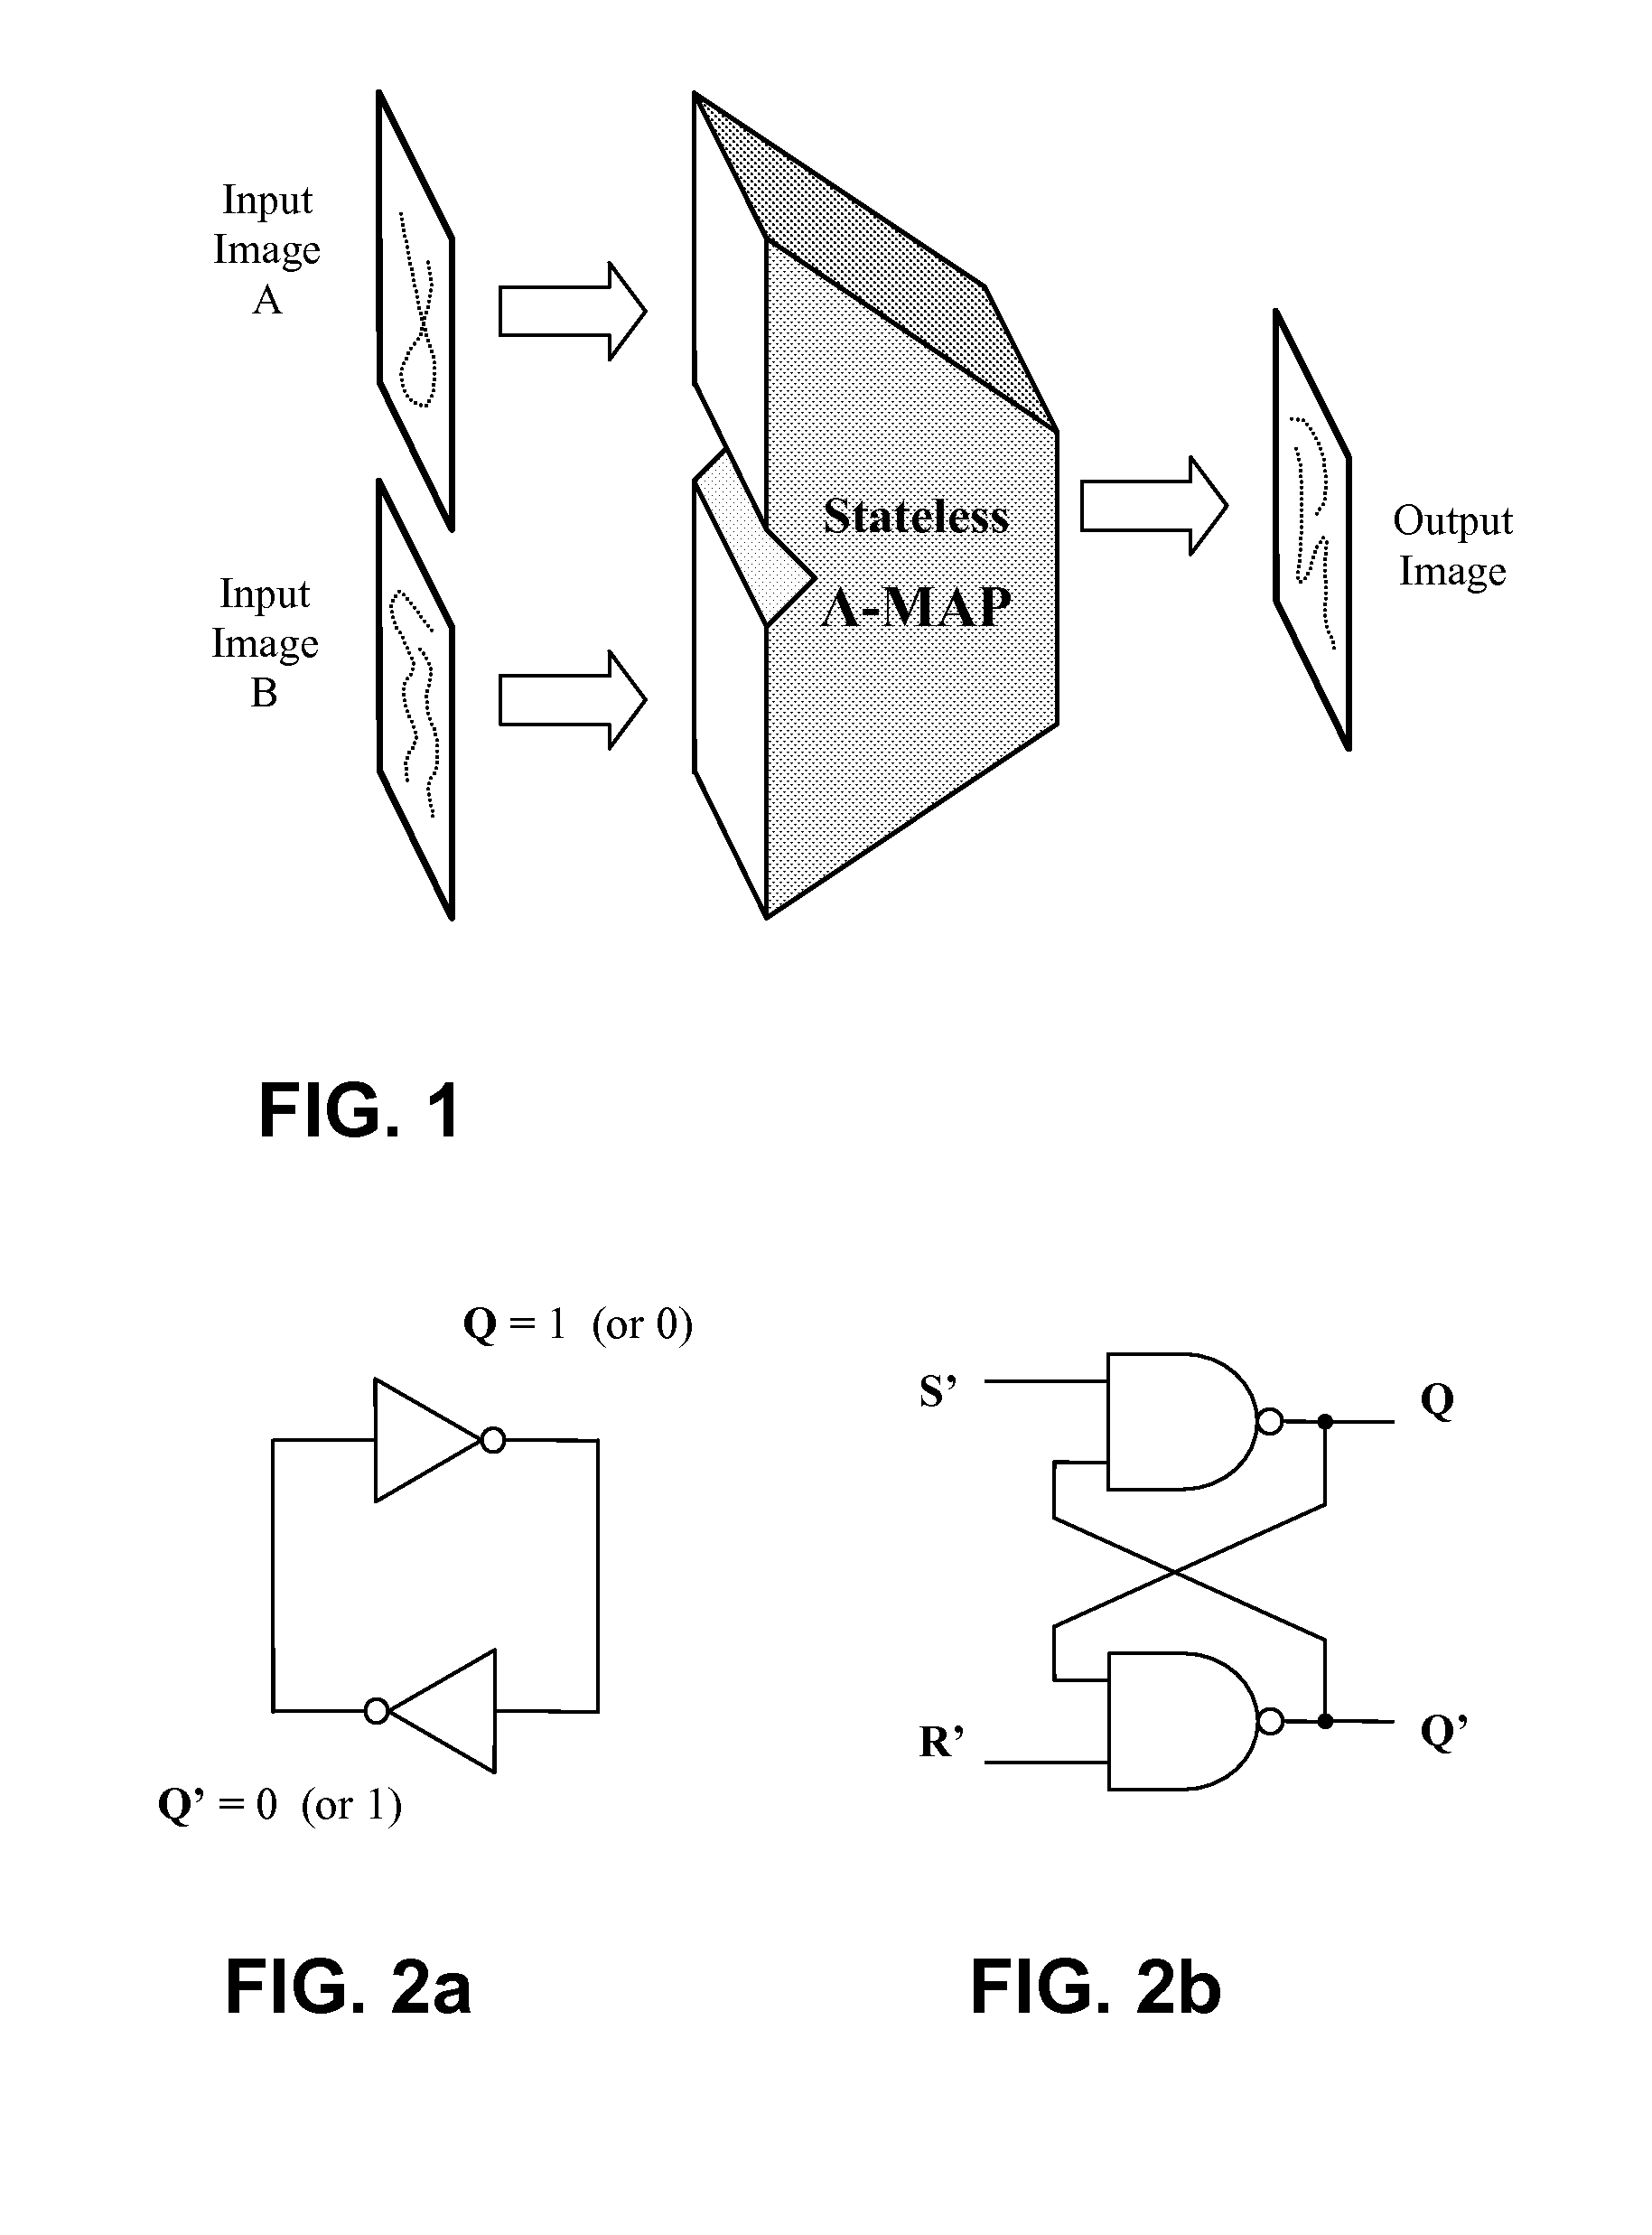 Method of generating an encoded output signal using a manifold association processor having a plurality of pairs of processing elements trained to store a plurality of reciprocal signal pairs